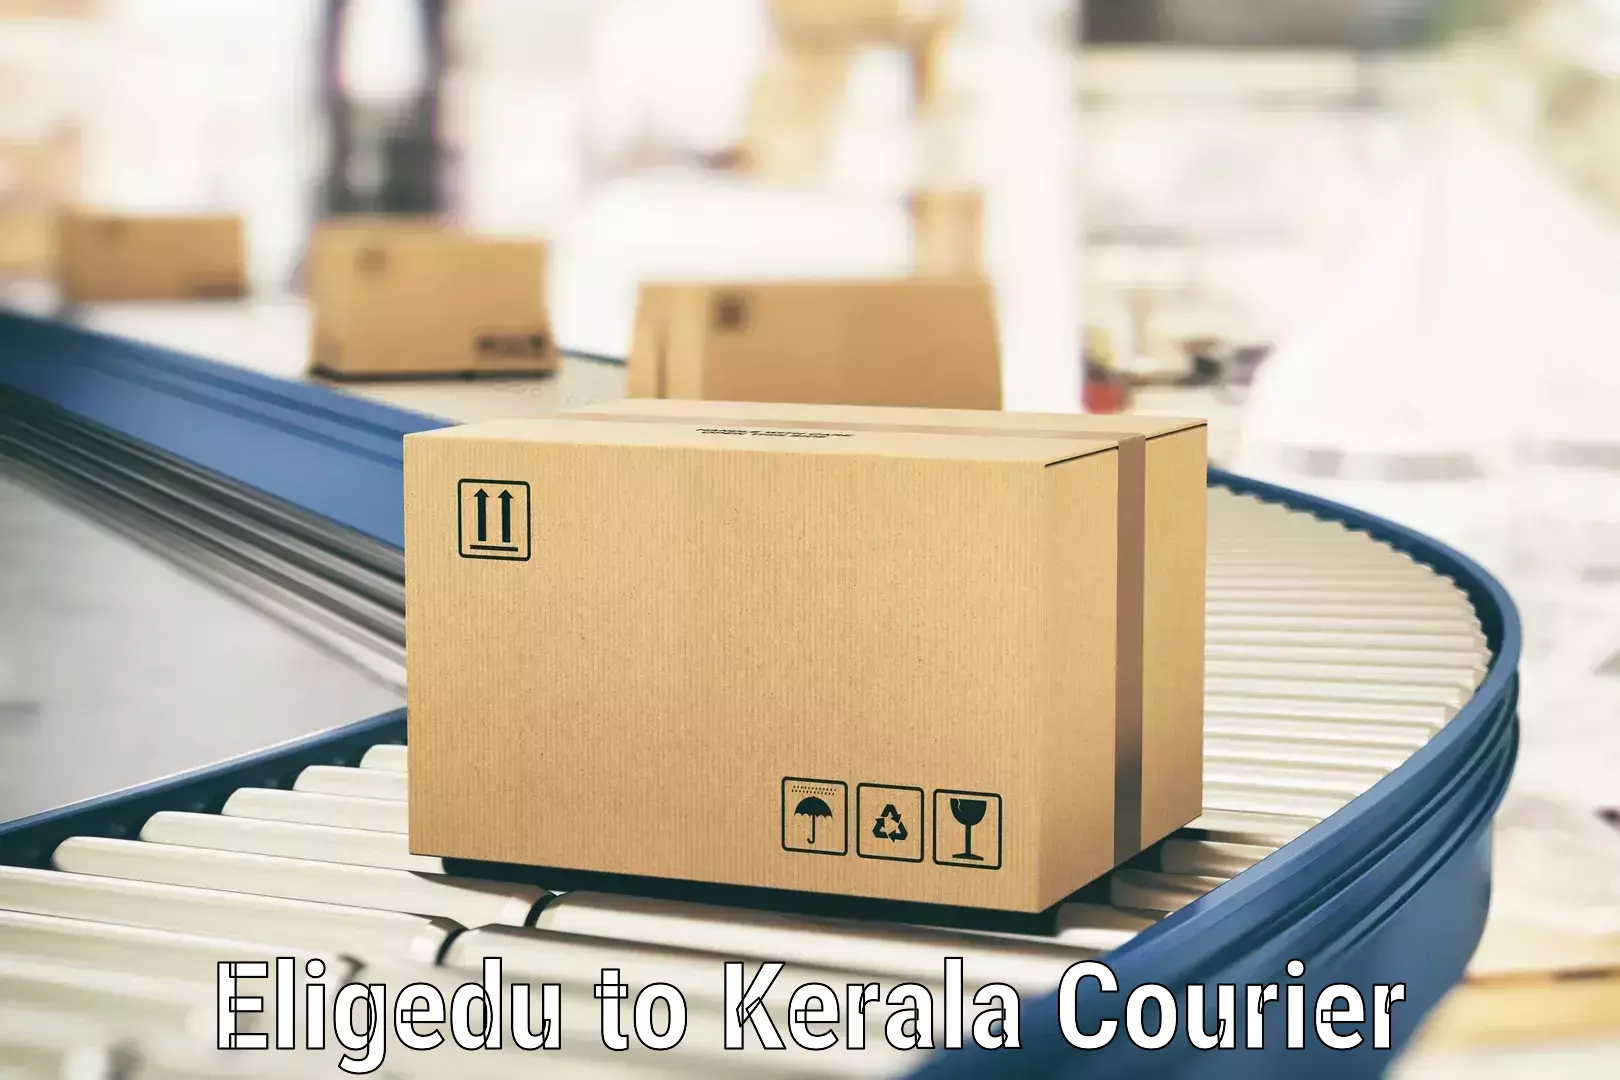 Advanced package delivery Eligedu to Guruvayoor